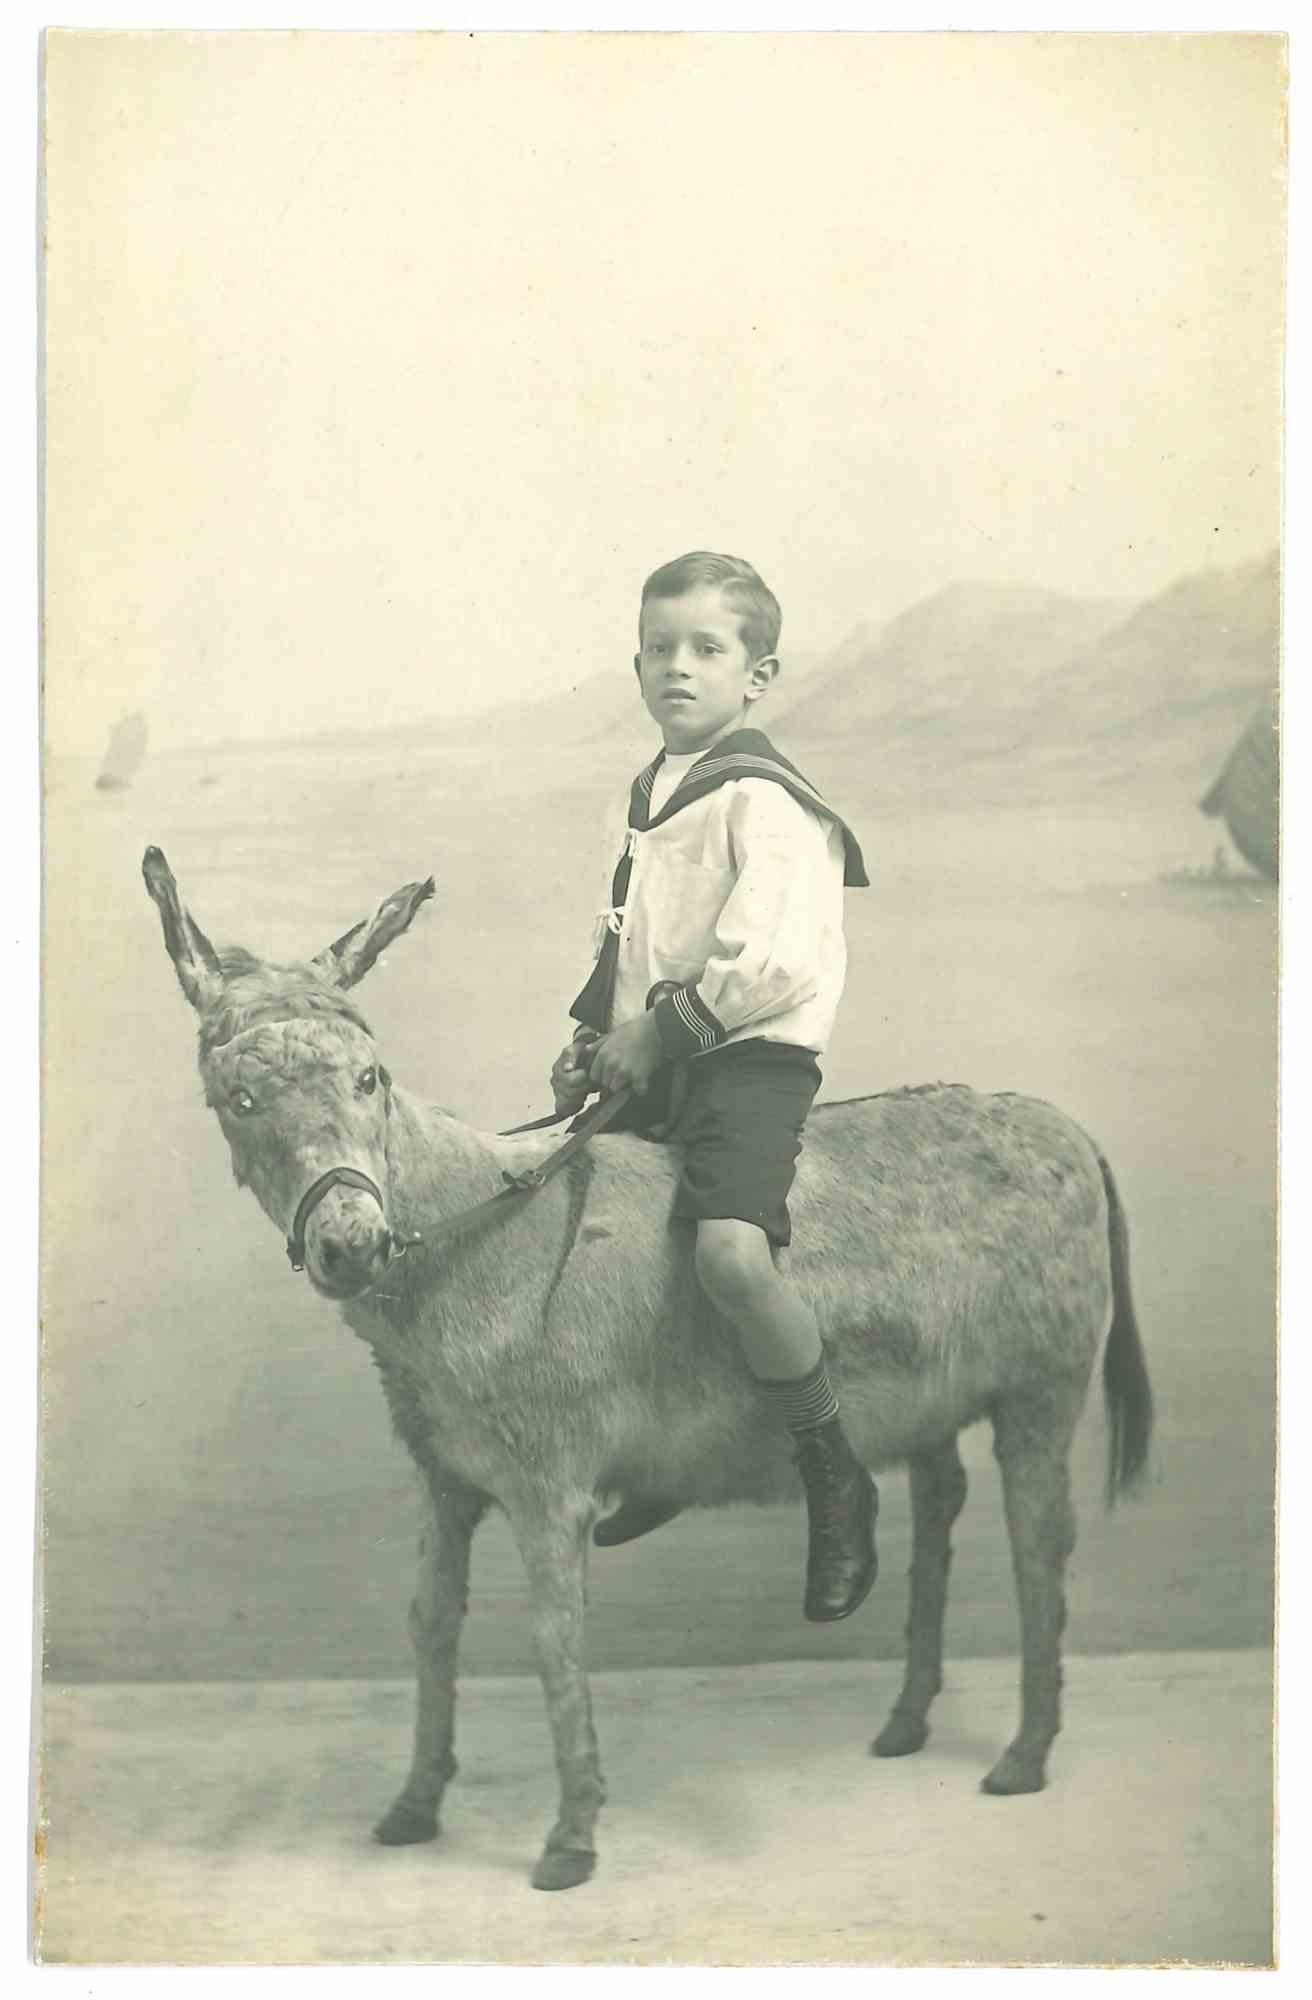 Riding Boy - The Old Days - Early 20th Century